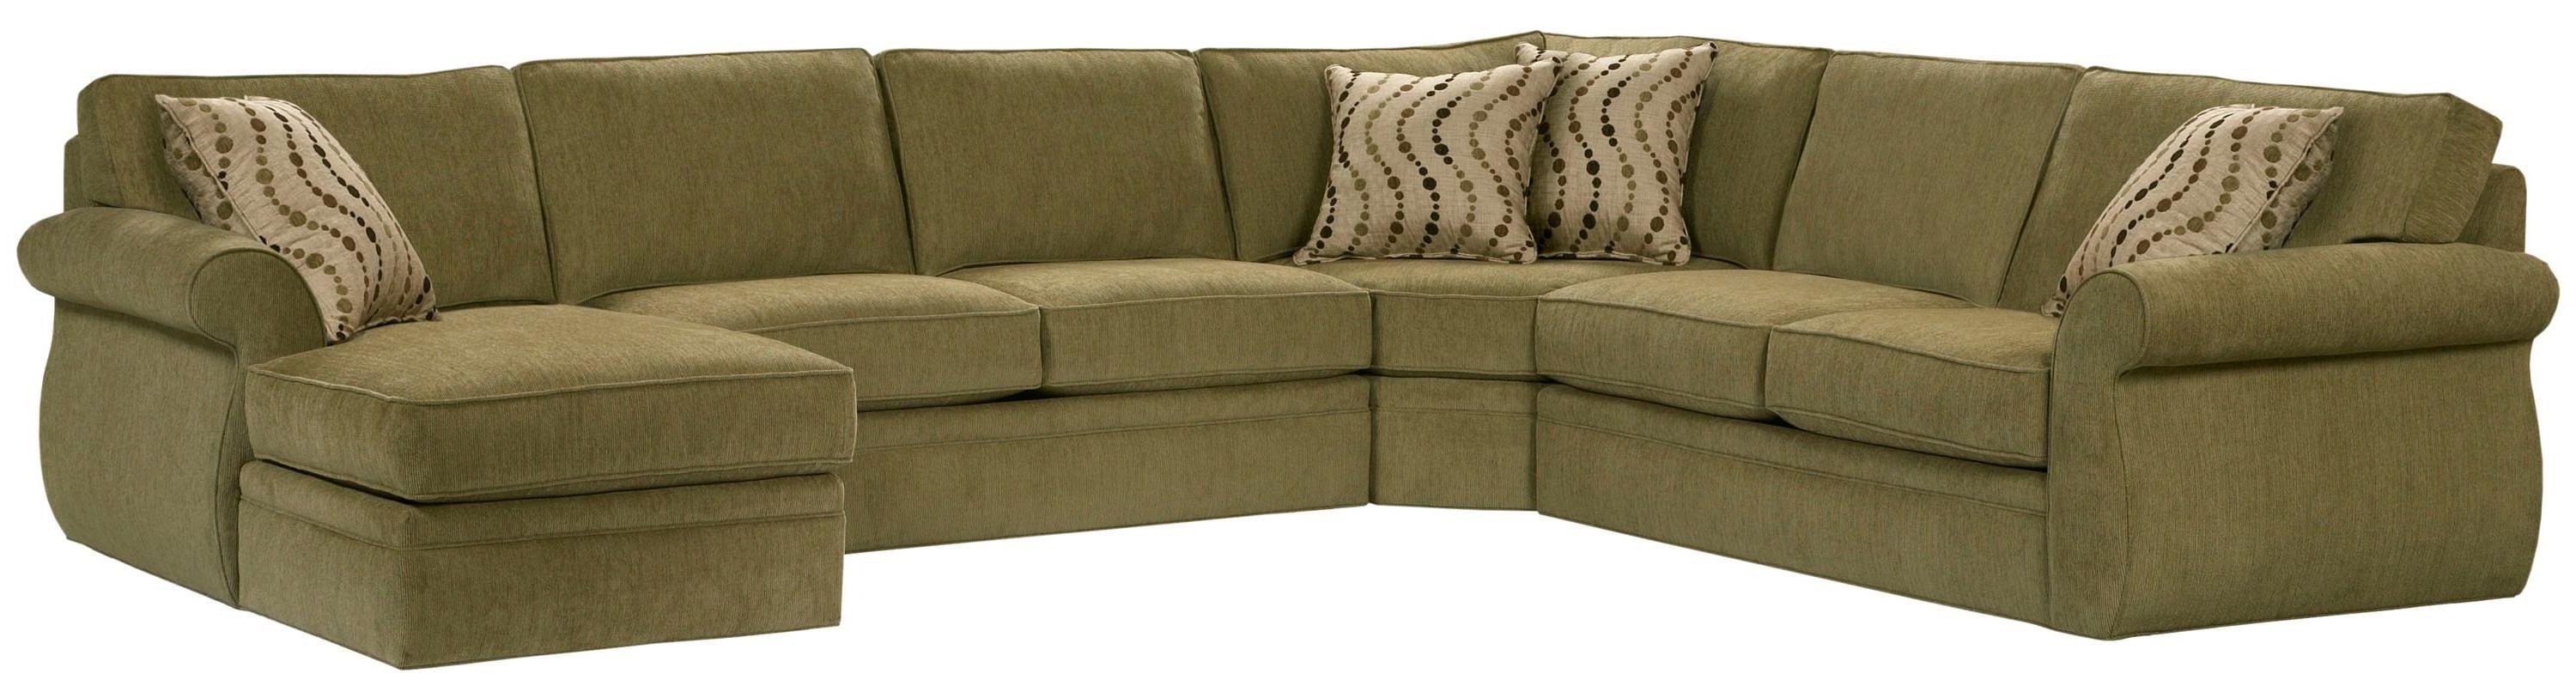 Broyhill Furniture Veronica Right Arm Facing Customizable Chaise In Most Current Broyhill Sectional Sofas (View 1 of 20)